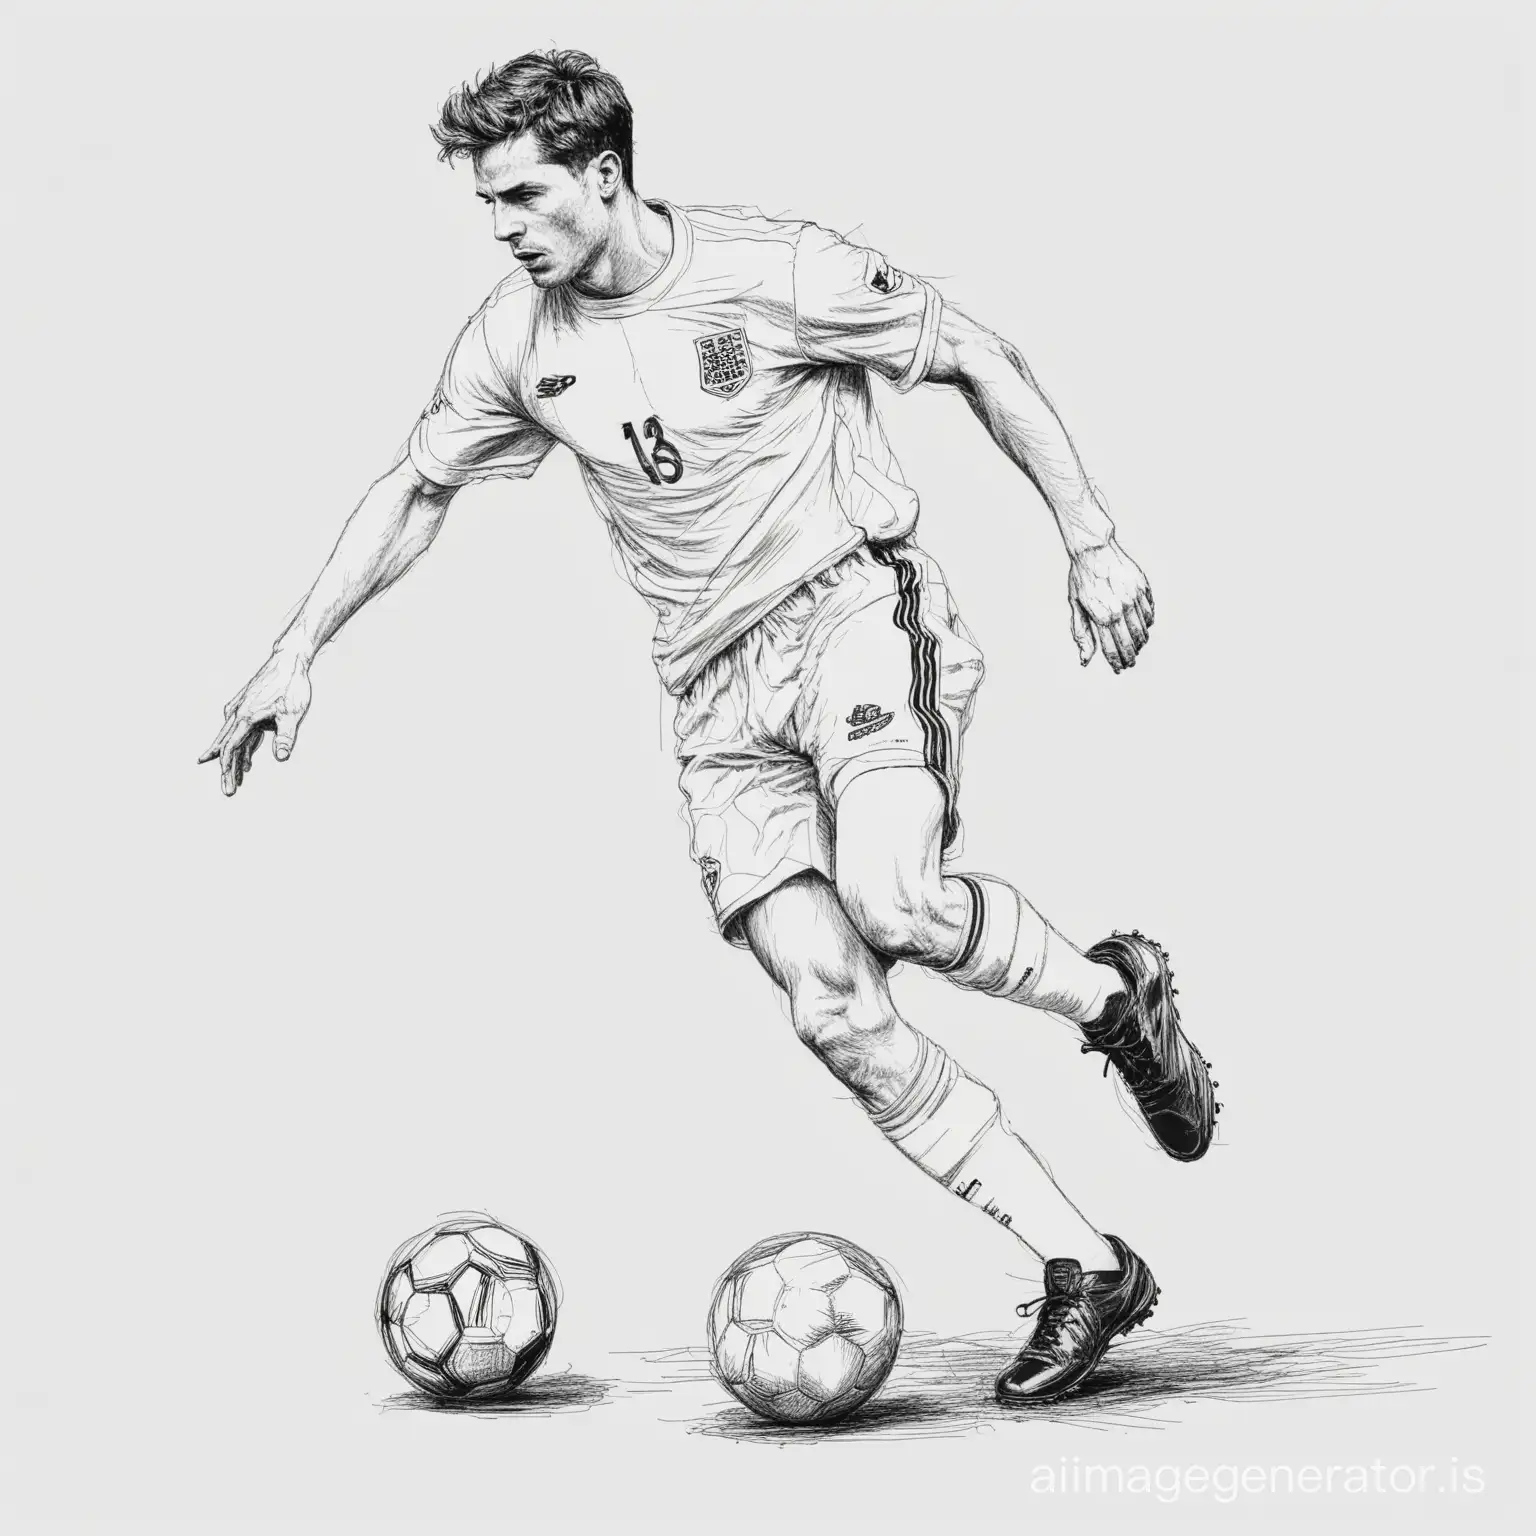 BLACK LINE DRAWING, OF AN ENGLISH SOCCER PLAYER WITH BALL